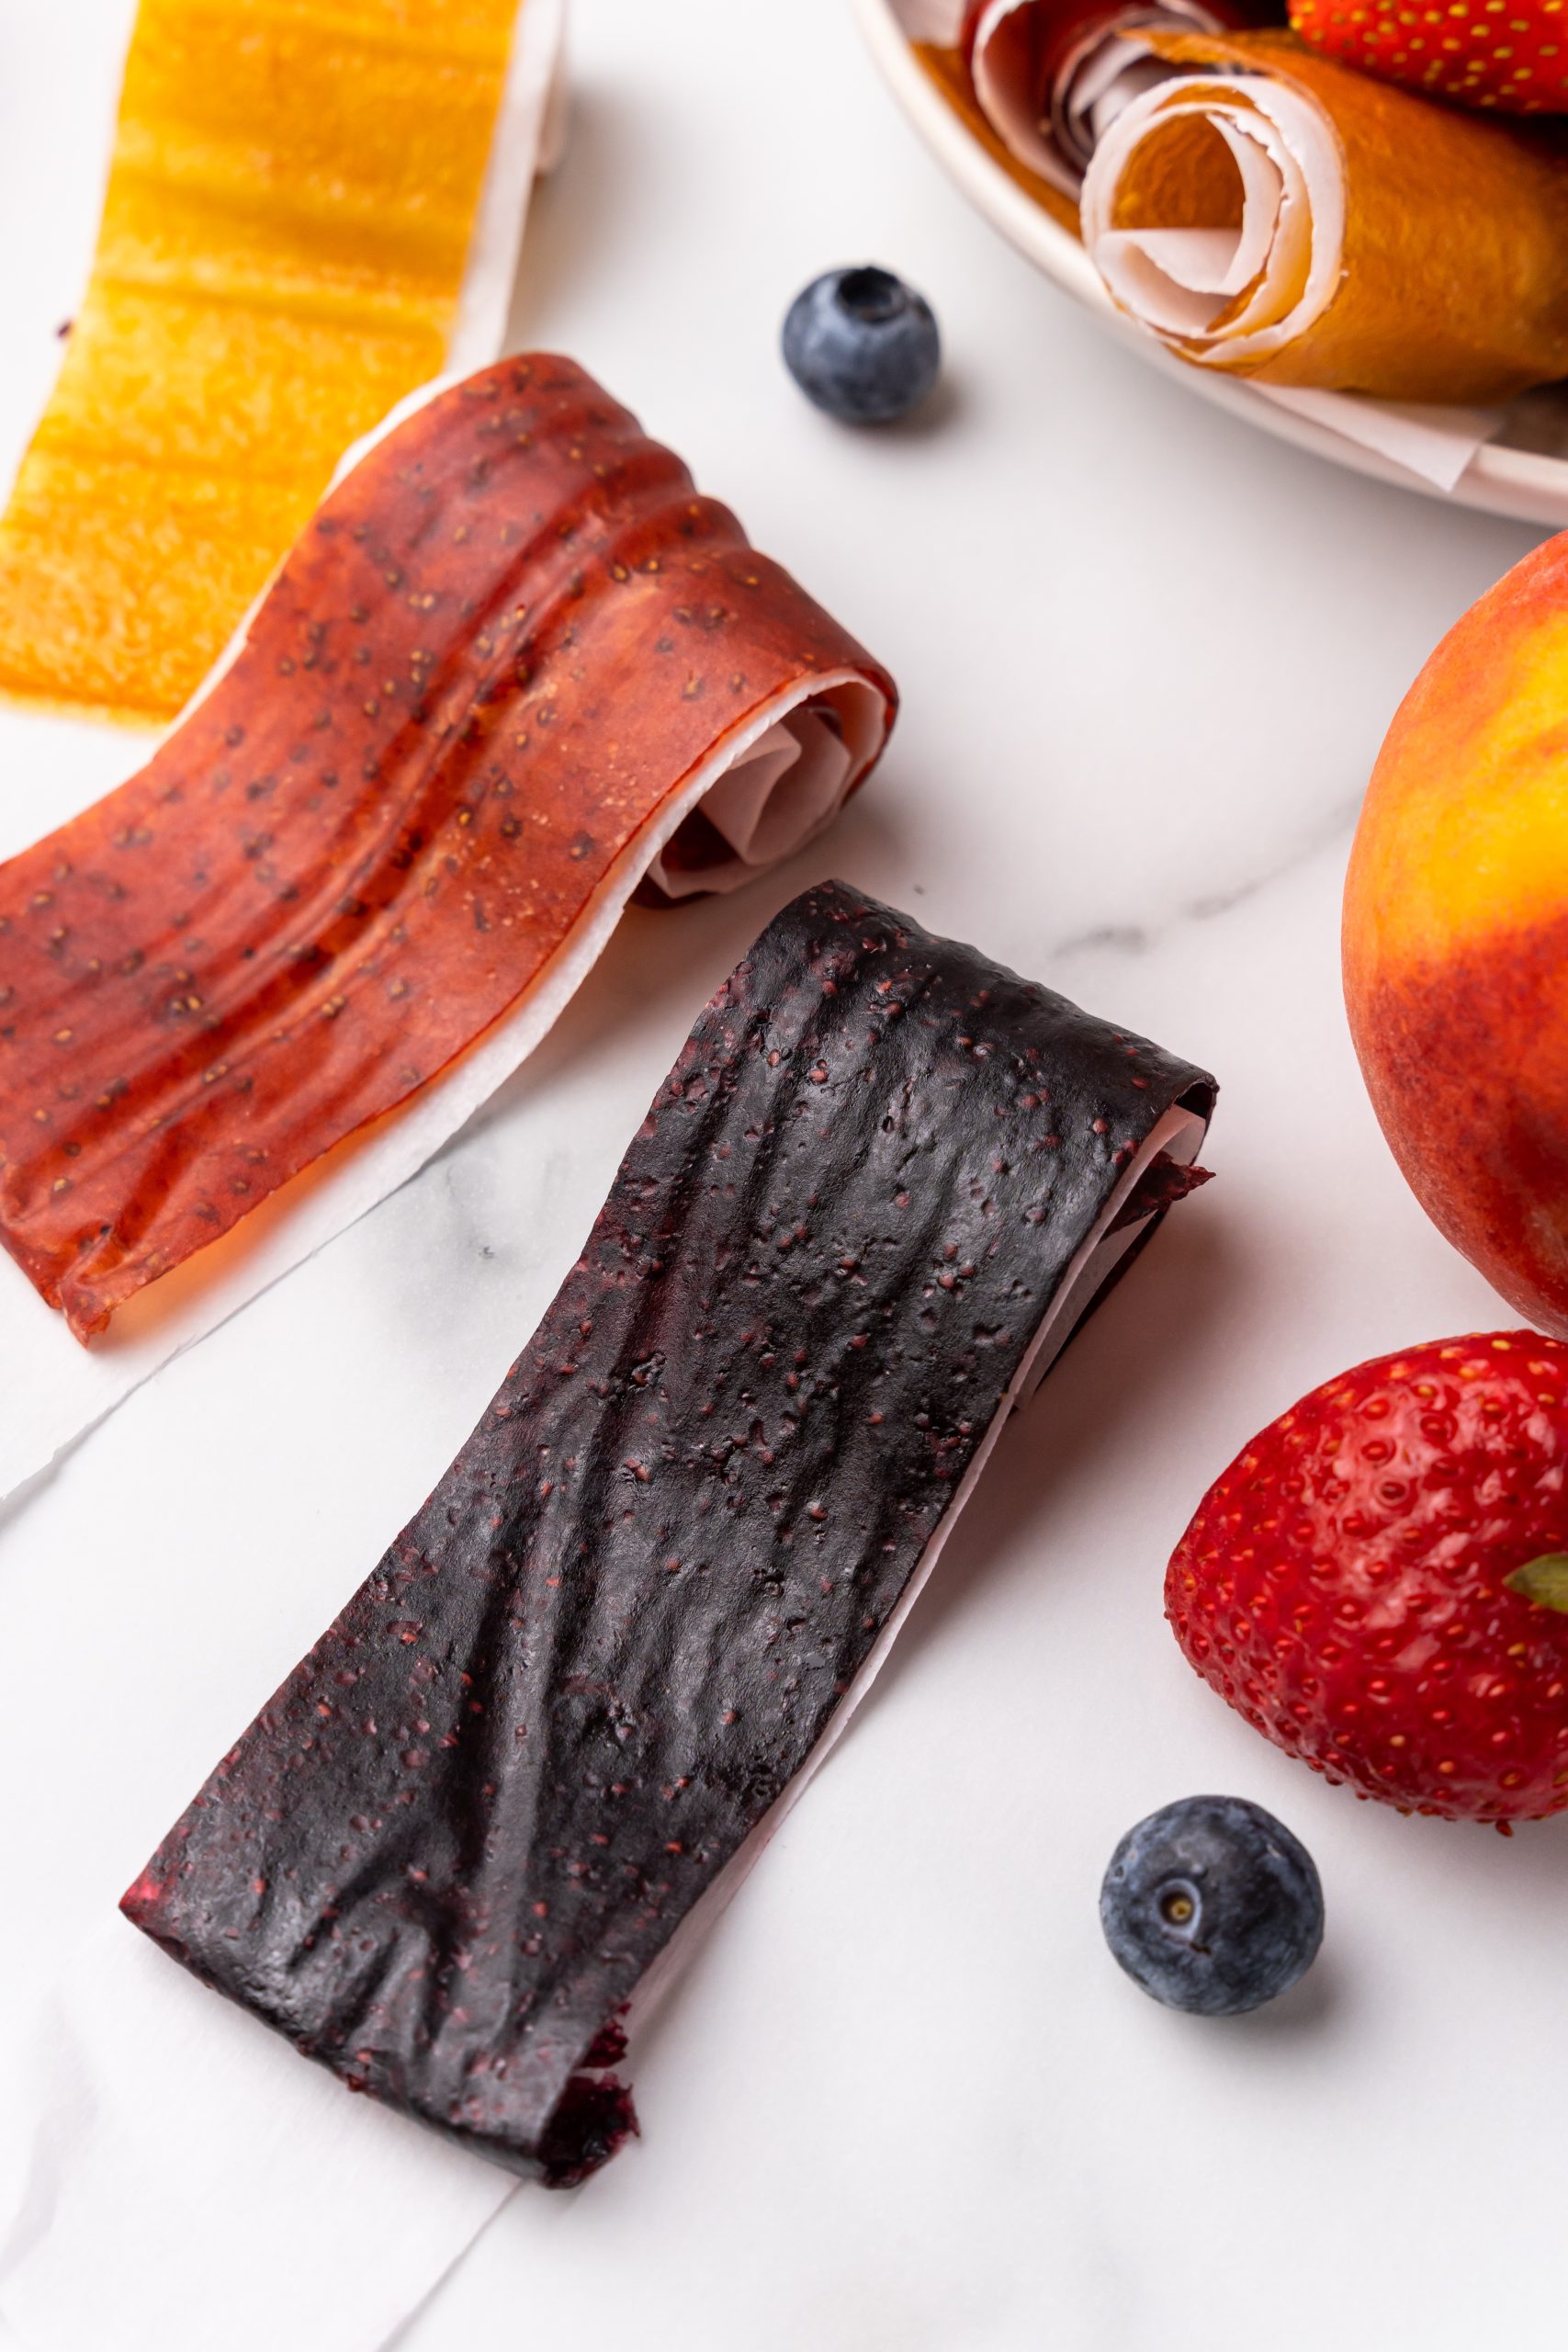 Fruit Leather Recipe - Wholesome Yum